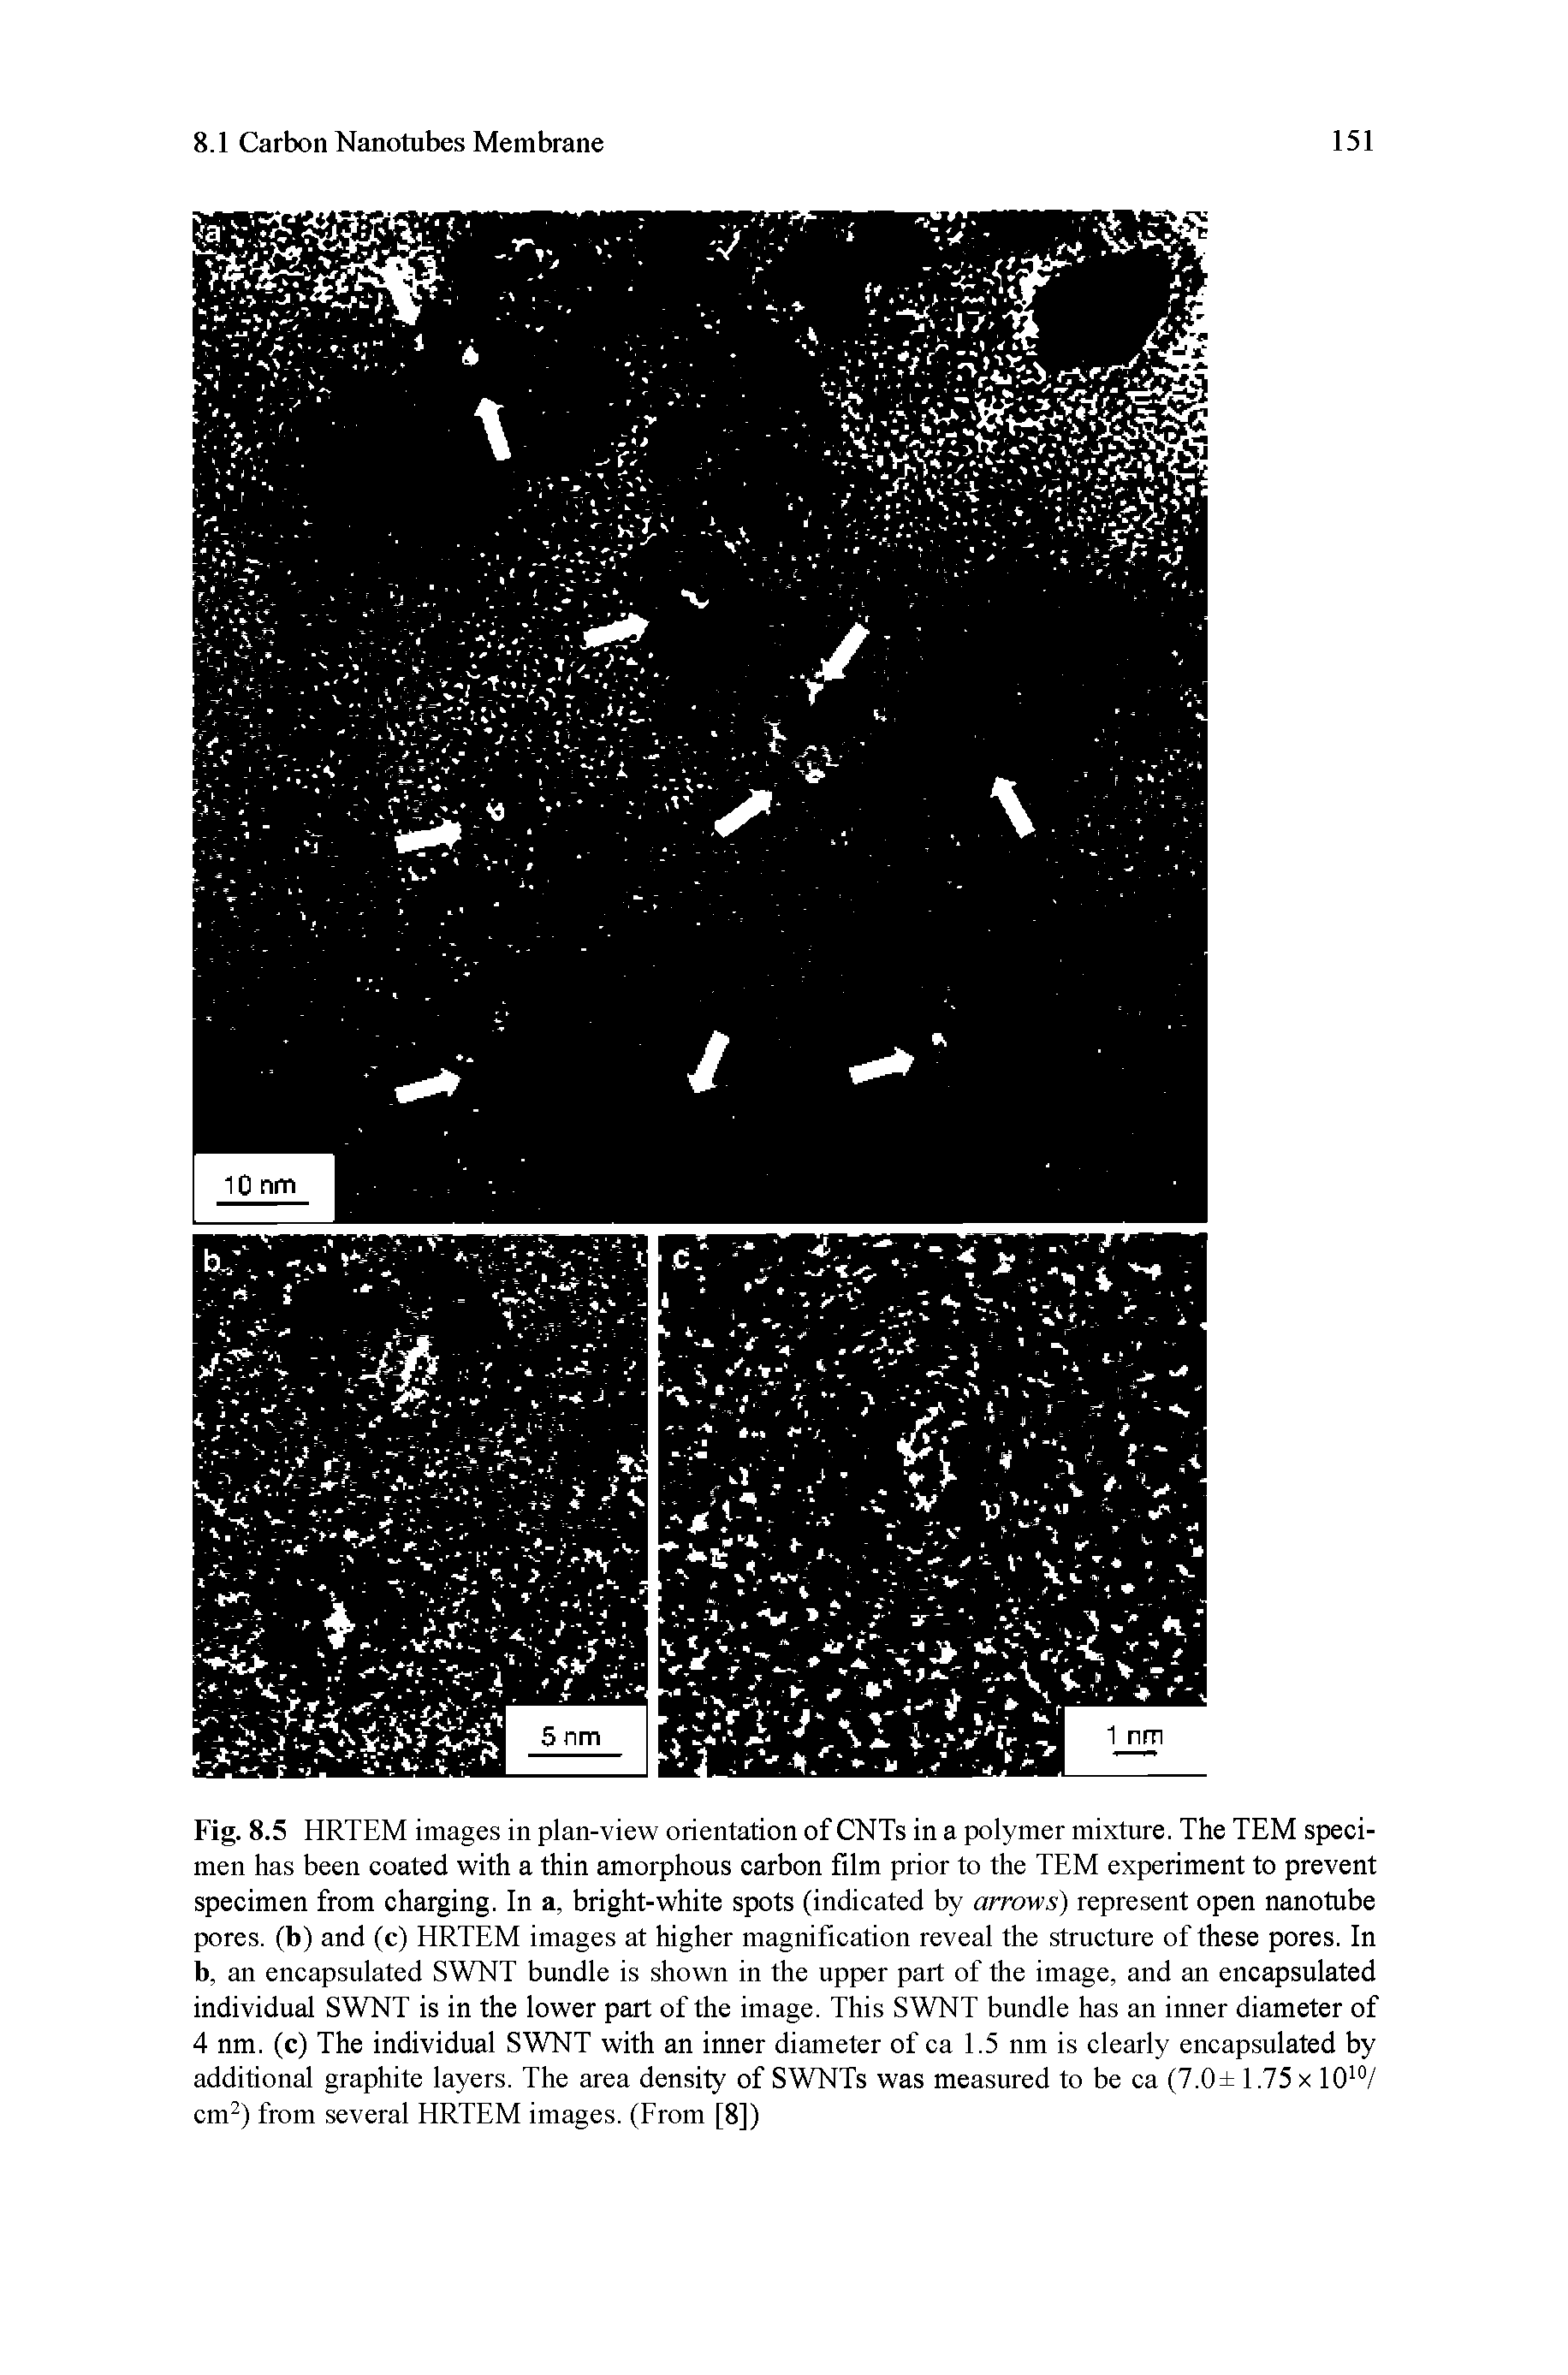 Fig. 8.5 HRTEM images in plan-view orientation of CNTs in a polymer mixture. The TEM specimen has been coated with a thin amorphous carbon film prior to the TEM experiment to prevent specimen from charging. In a, bright-white spots (indicated by arrows) represent open nanotube pores, (b) and (c) HRTEM images at higher magnification reveal the structure of these pores. In b, an encapsulated SWNT bundle is shown in the upper part of the image, and an encapsulated individual SWNT is in the lower part of the image. This SWNT bundle has an inner diameter of 4 nm. (c) The individual SWNT with an inner diameter of ca 1.5 nm is clearly encapsulated by additional graphite layers. The area density of SWNTs was measured to be ca (7.0 1.75 x lO / cm ) from several HRTEM images. (Erom [8])...